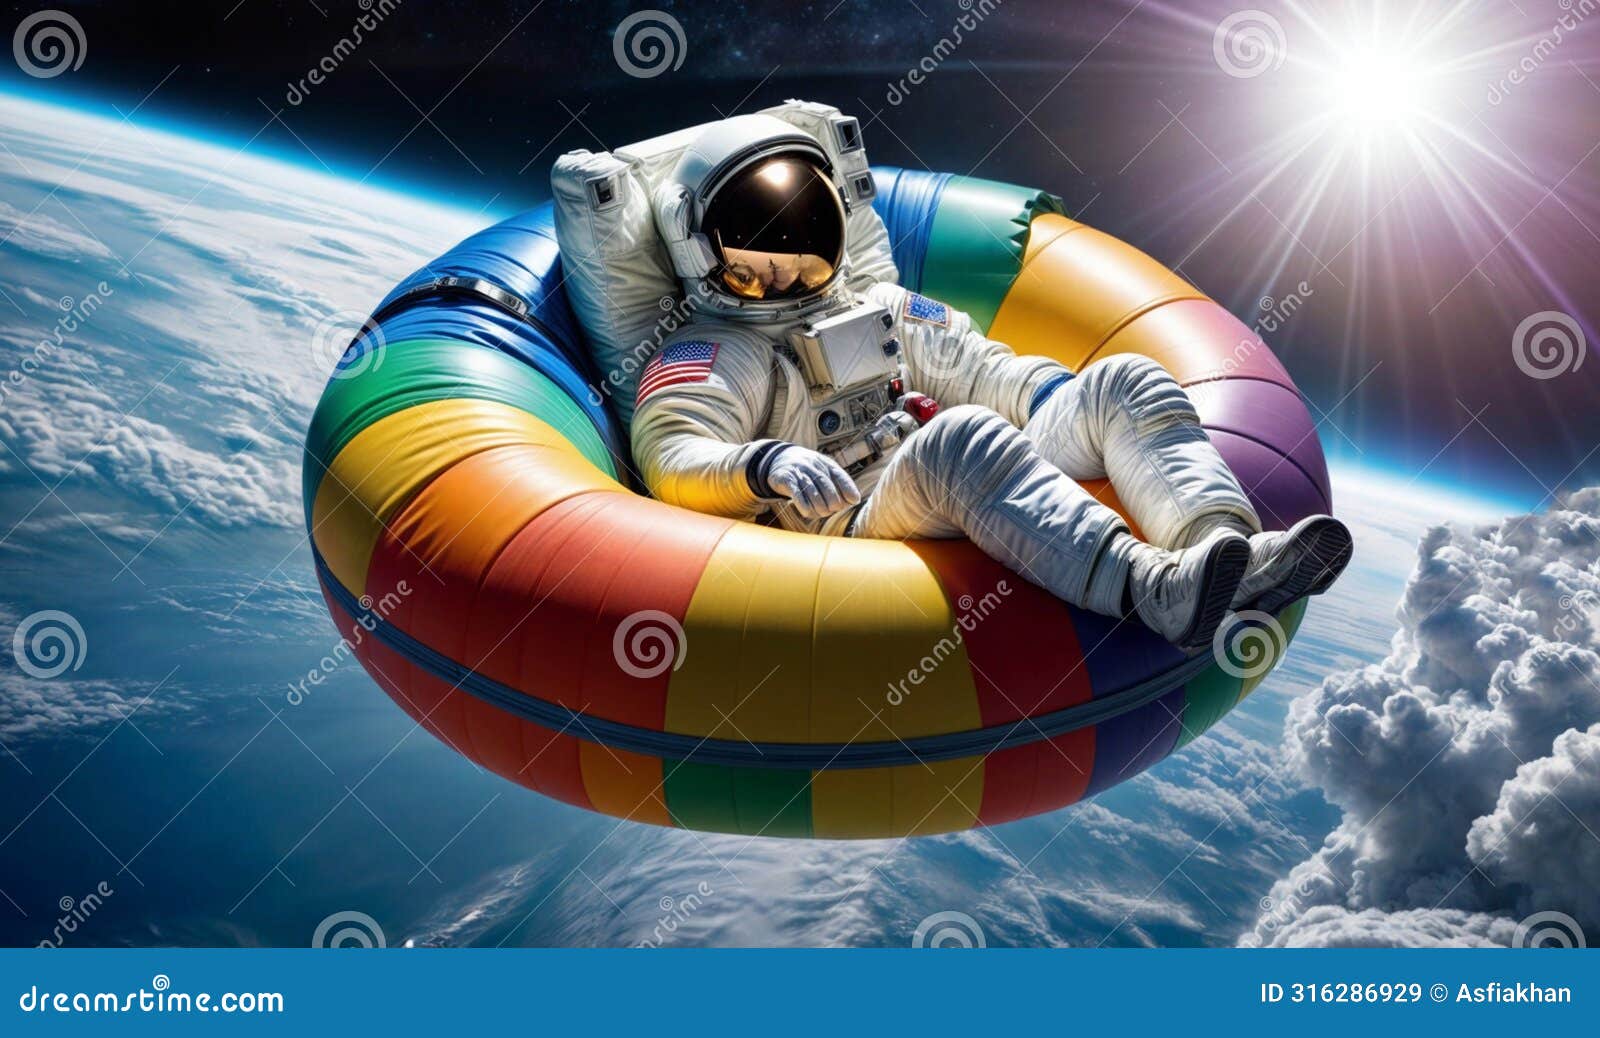 an astronaut in a spacesuit is floating in a rainbow-colored donut d tube